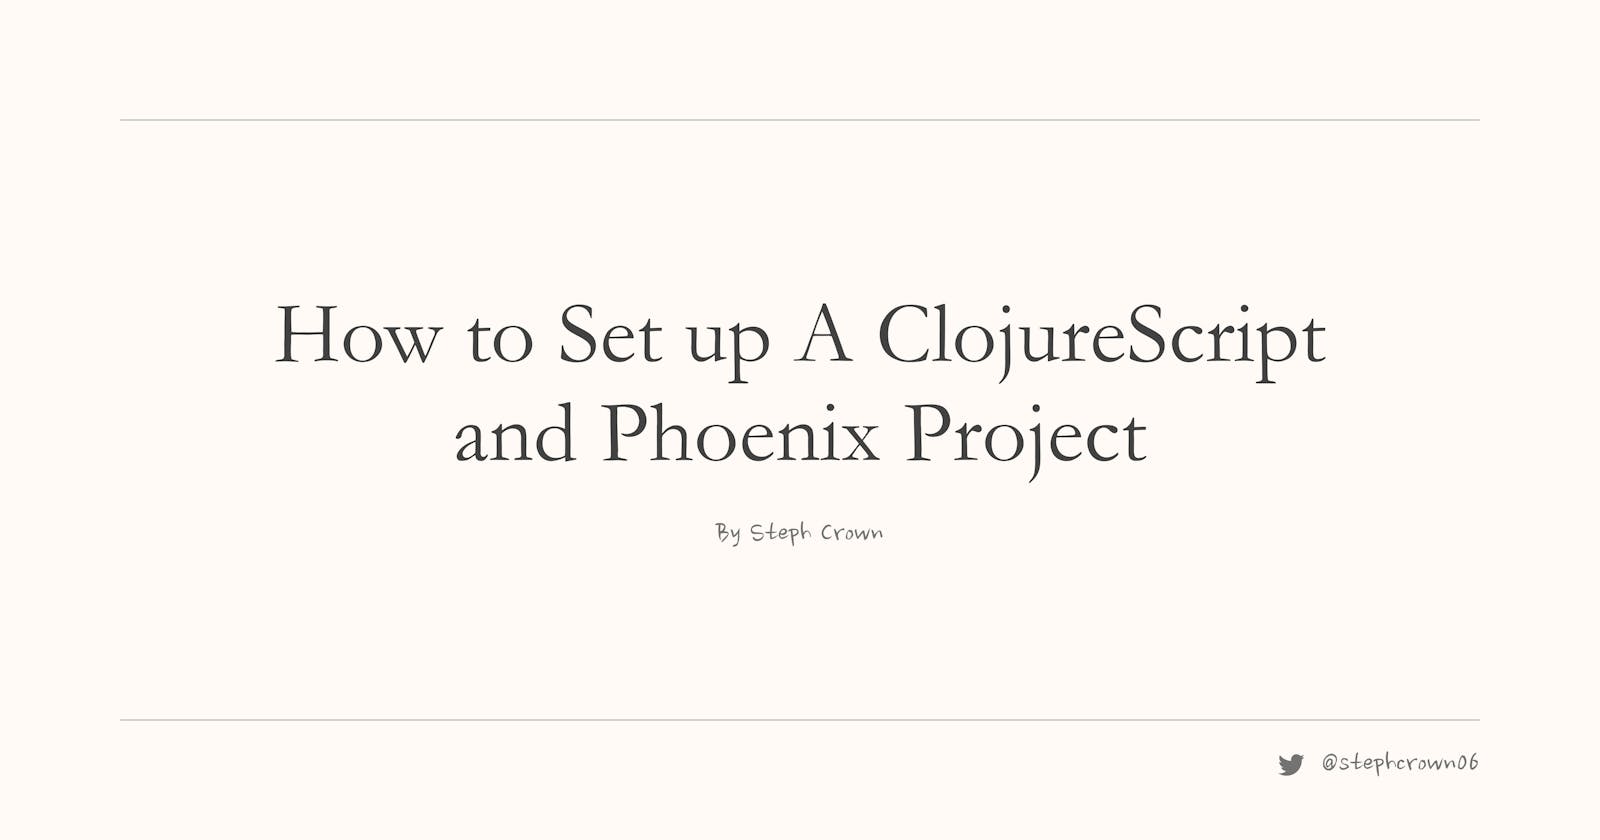 How to Set up A Clojure Script and Phoenix Project